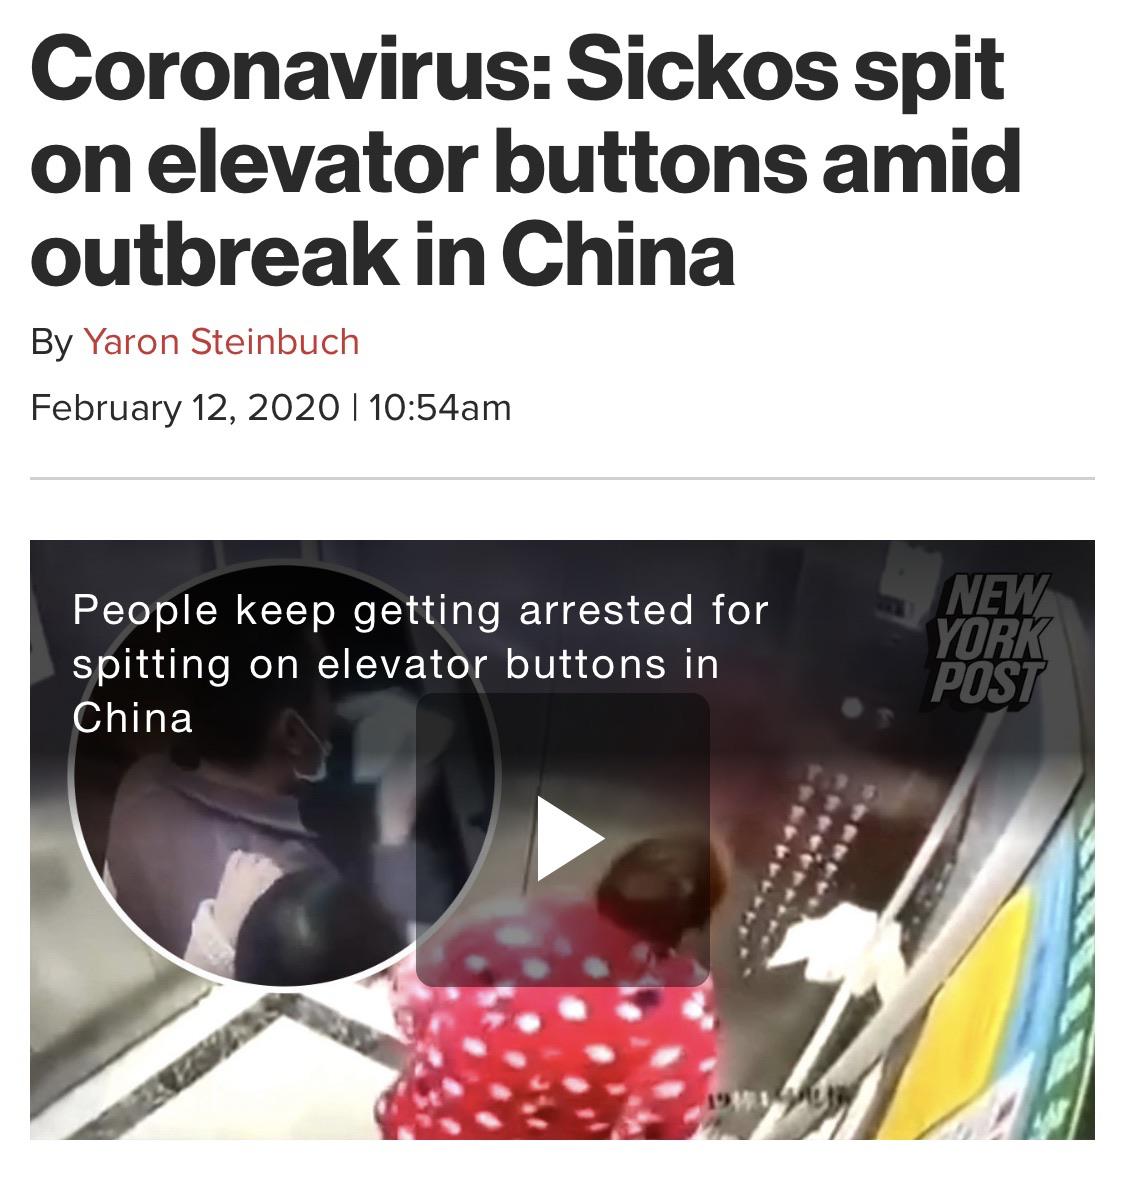 new york post - CoronavirusSickosspit on elevator buttons amid outbreak in China By Yaron Steinbuch 1 am People keep getting arrested for spitting on elevator buttons in China New York Post